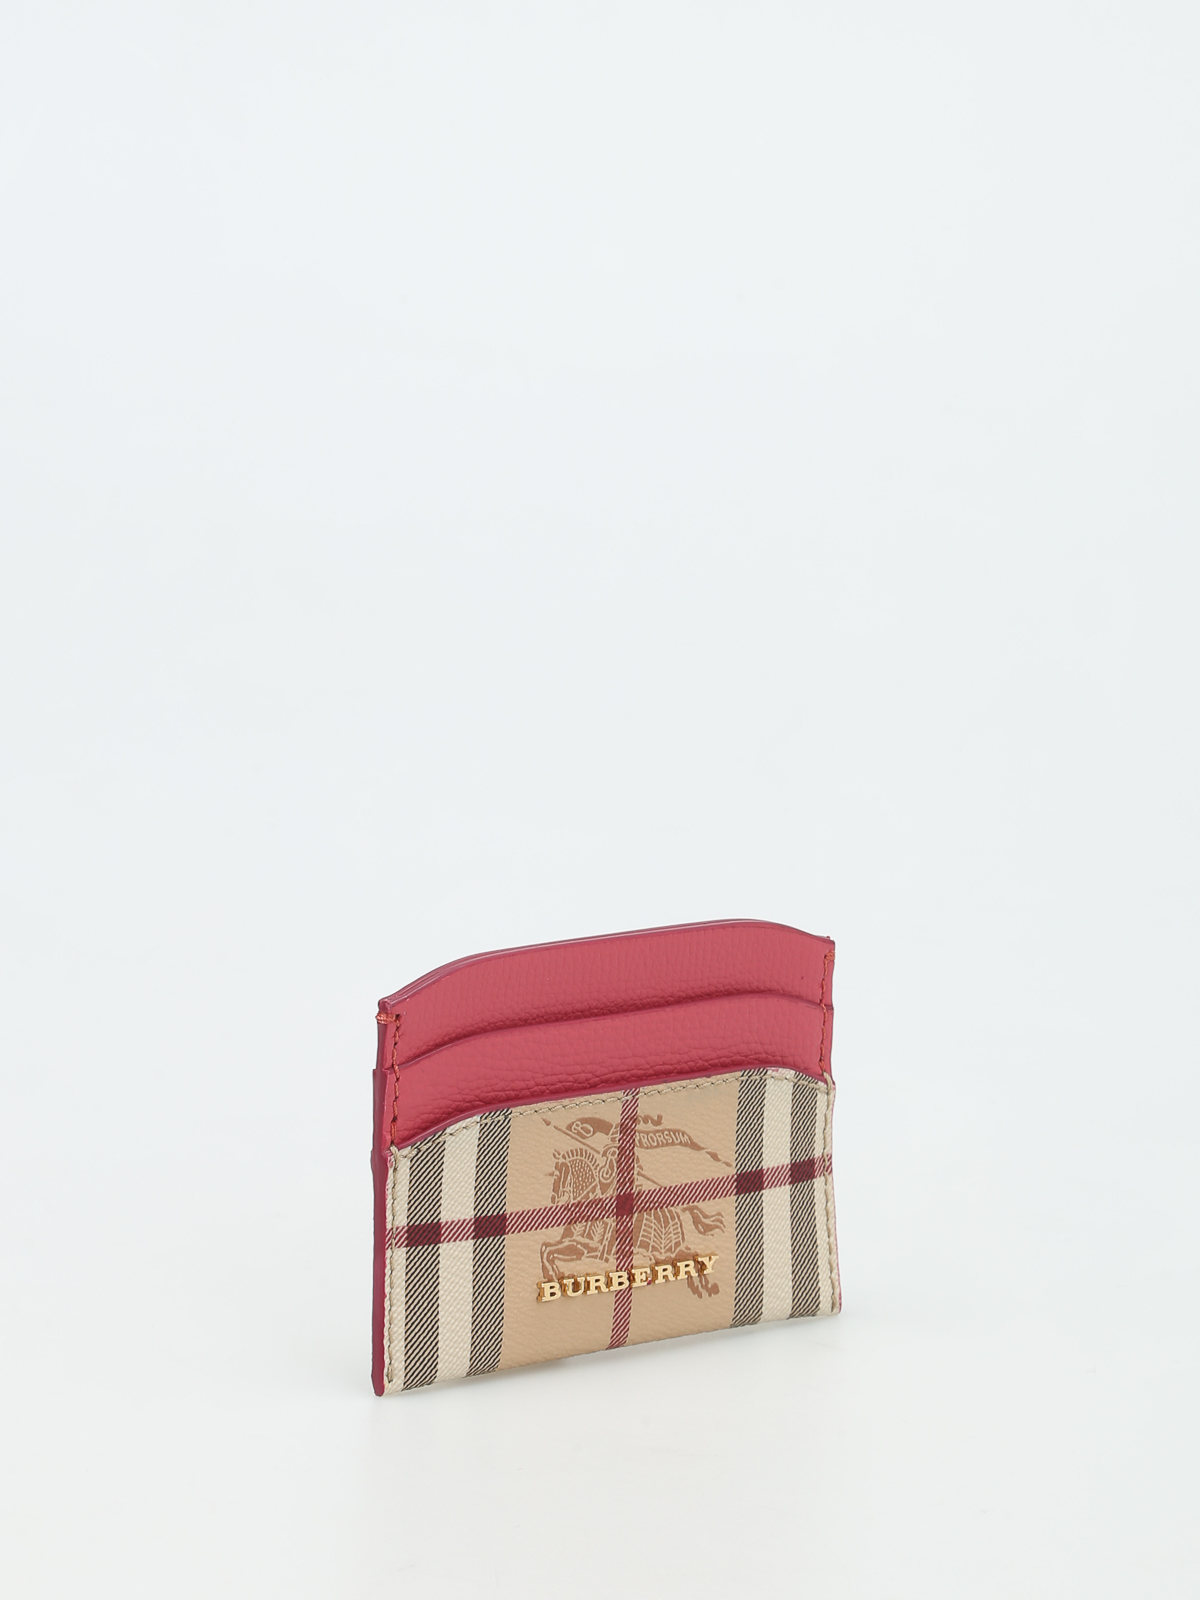 Genuine Burberry Italian leather Red Card Case Holder - Wallet